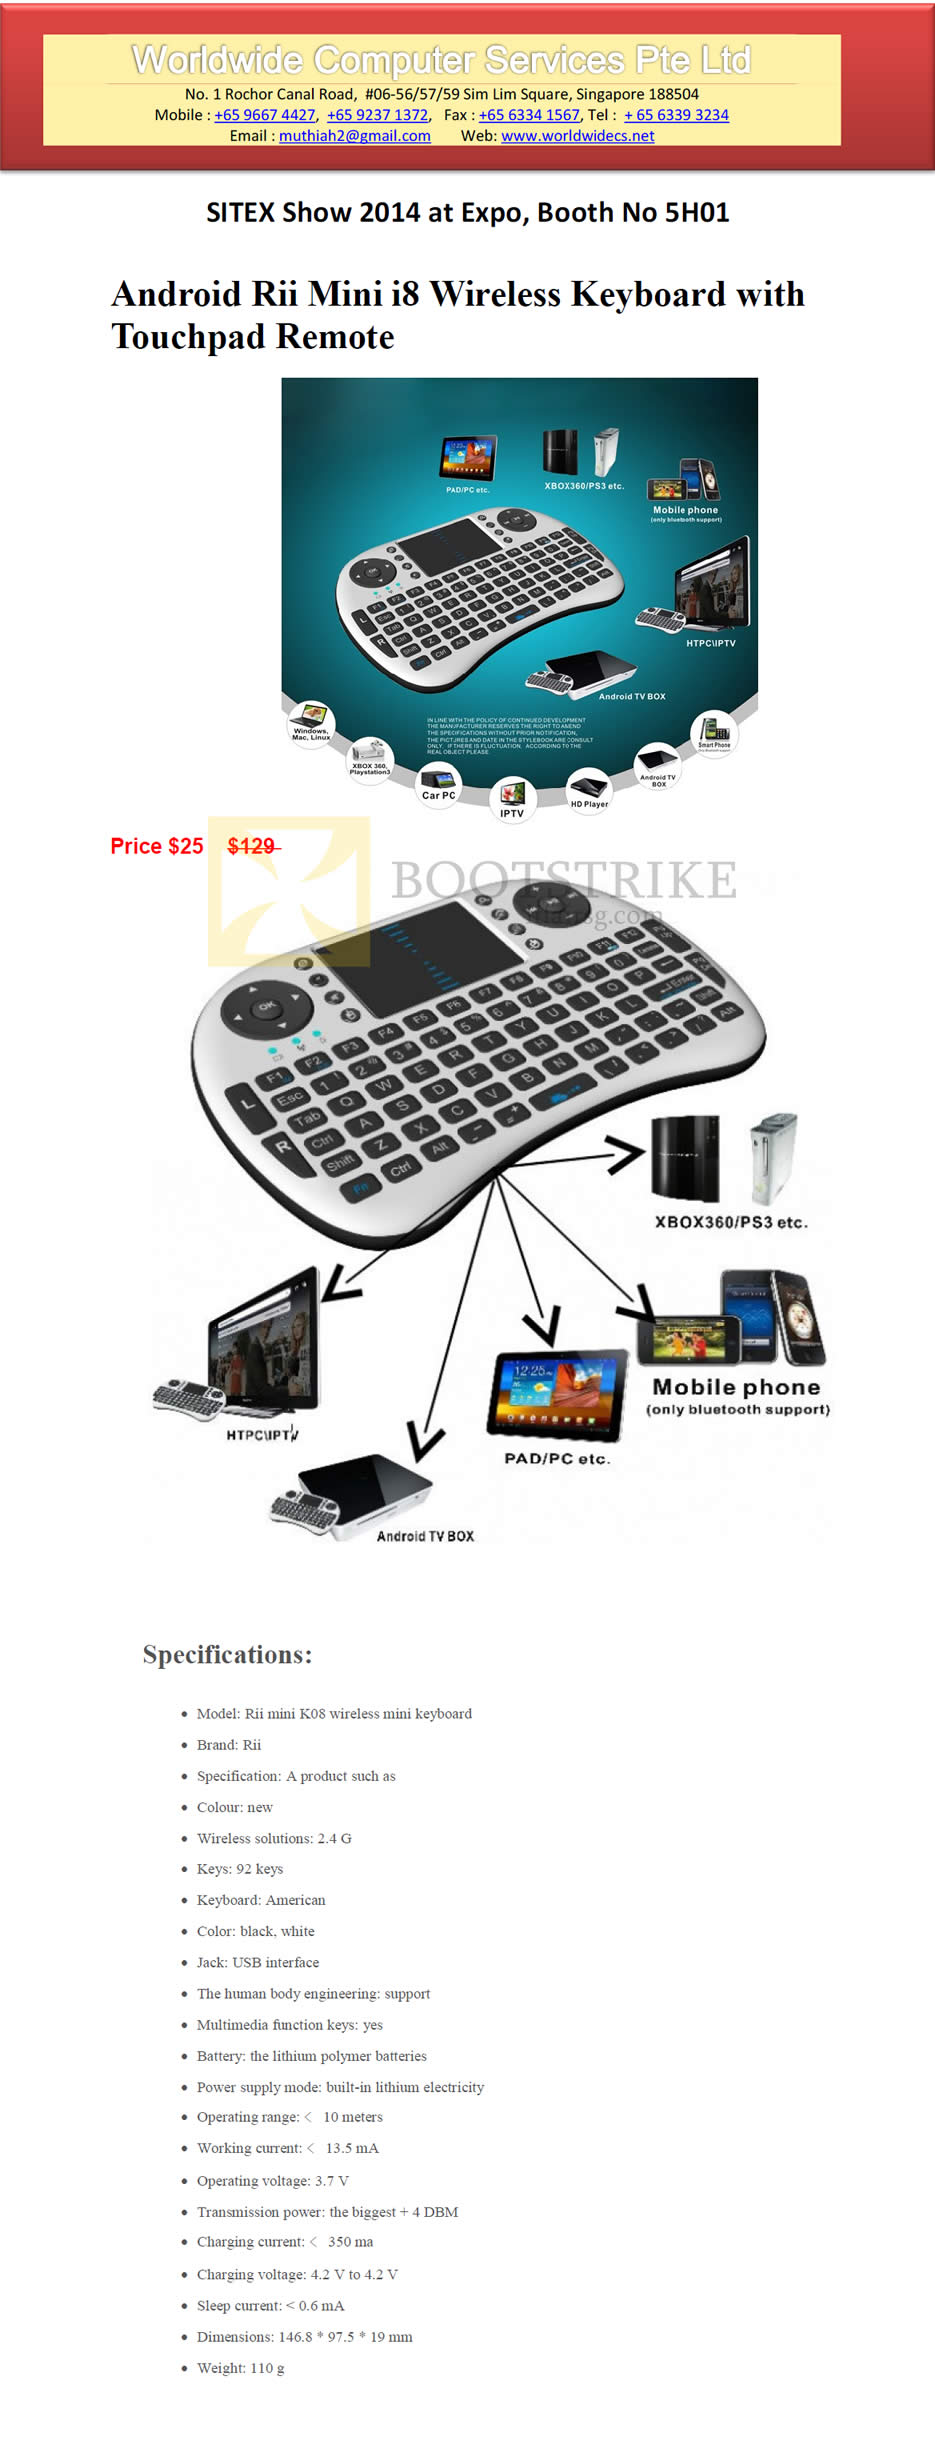 SITEX 2014 price list image brochure of Worldwide Computer Services Android Rii Mini Wireless Mini Keyboard